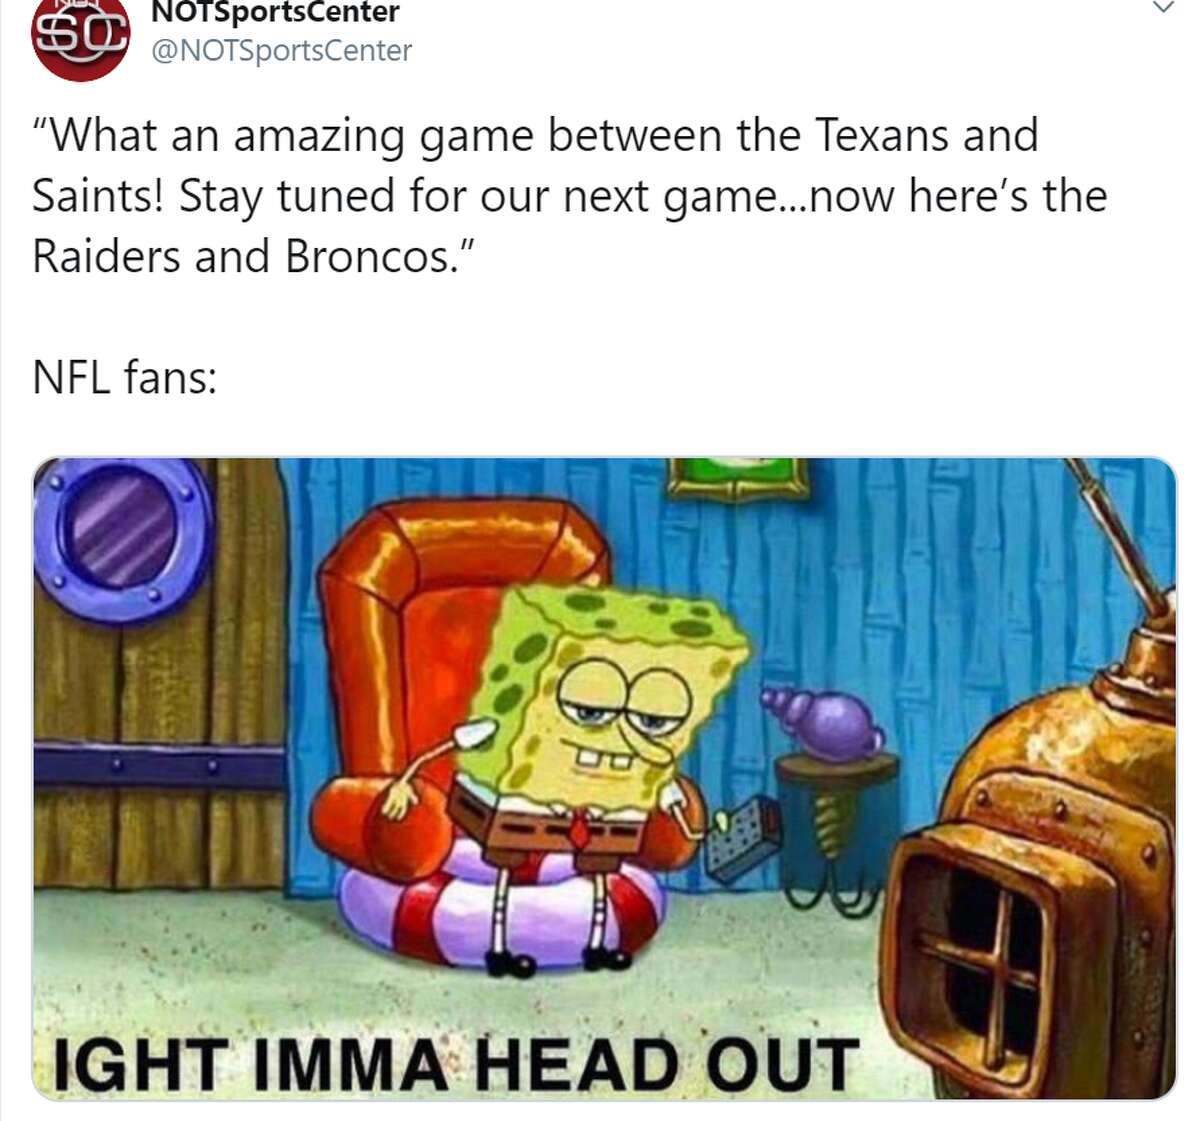 Memes feel the Texans' pain after gut-wrenching loss.